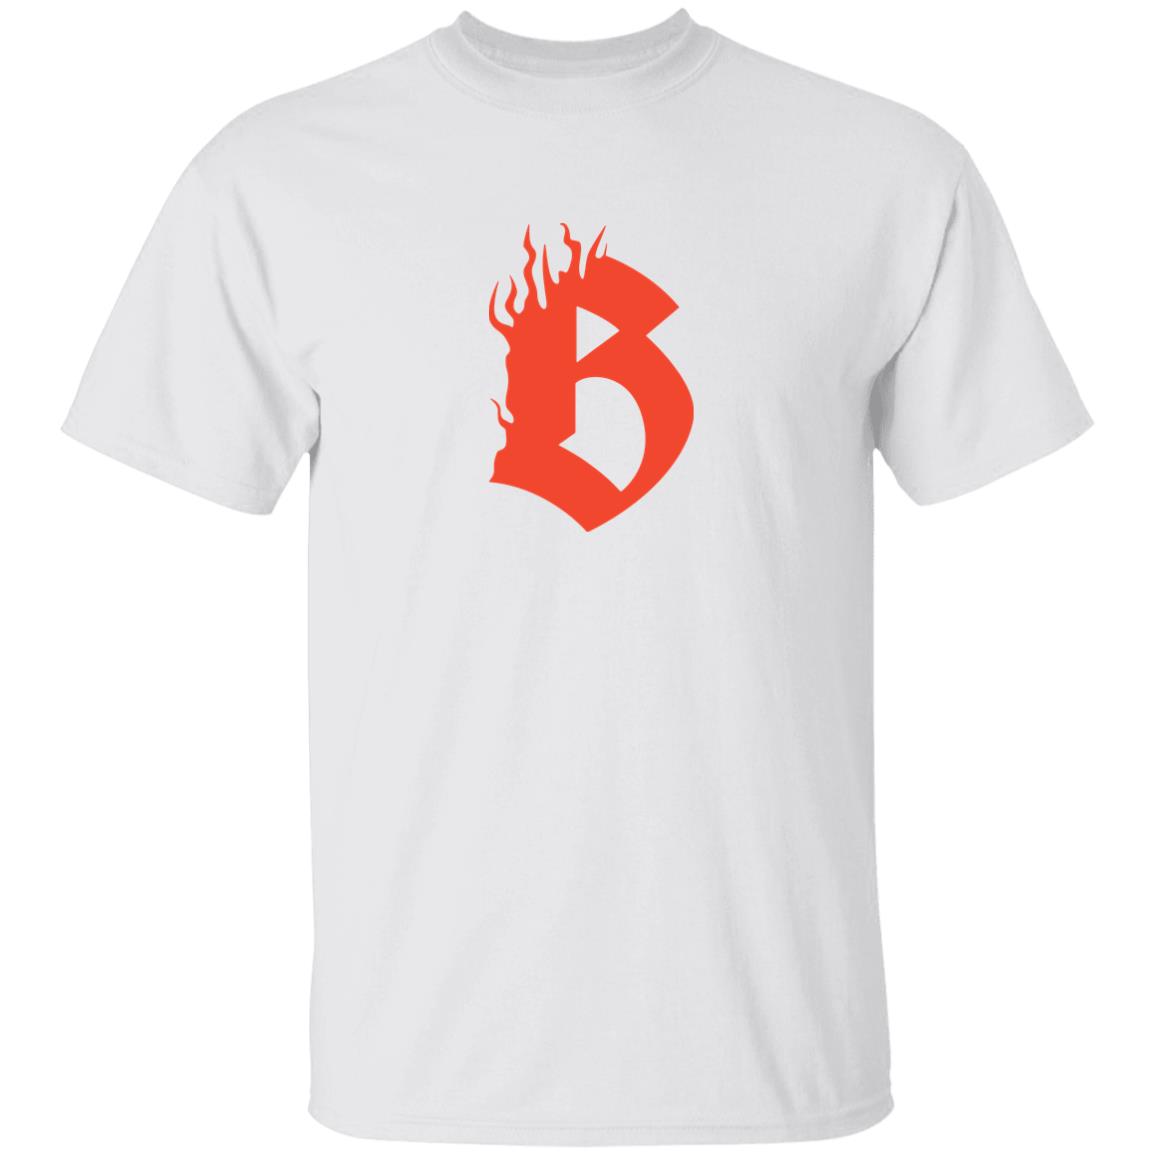 Benny Soliven Merch Flame B Tee
#BennySolivenMerch #FlameBTee #Streetwear #USFashion #TrendyApparel #LimitedEdition #Merchandise #FashionTrends #PopularStyle #BennySolivenFans #USClothing #TeeShirtStyle

tipatee.com/product/benny-…